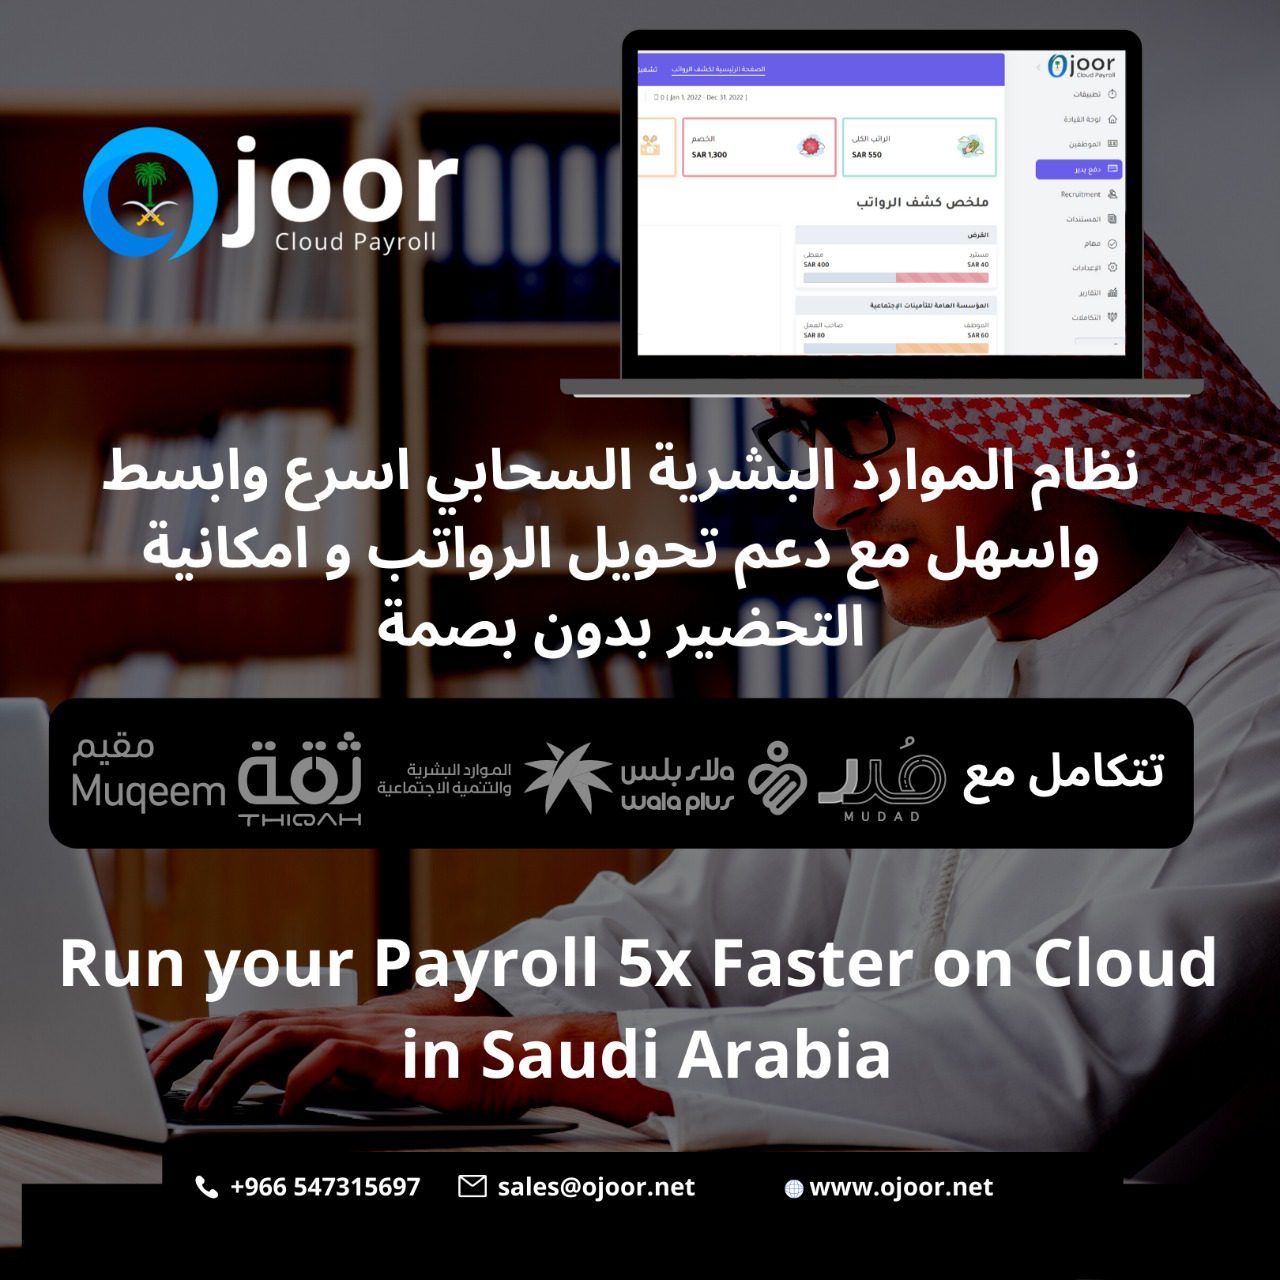 Which are the best 5 practices of the Payroll System in Saudi?